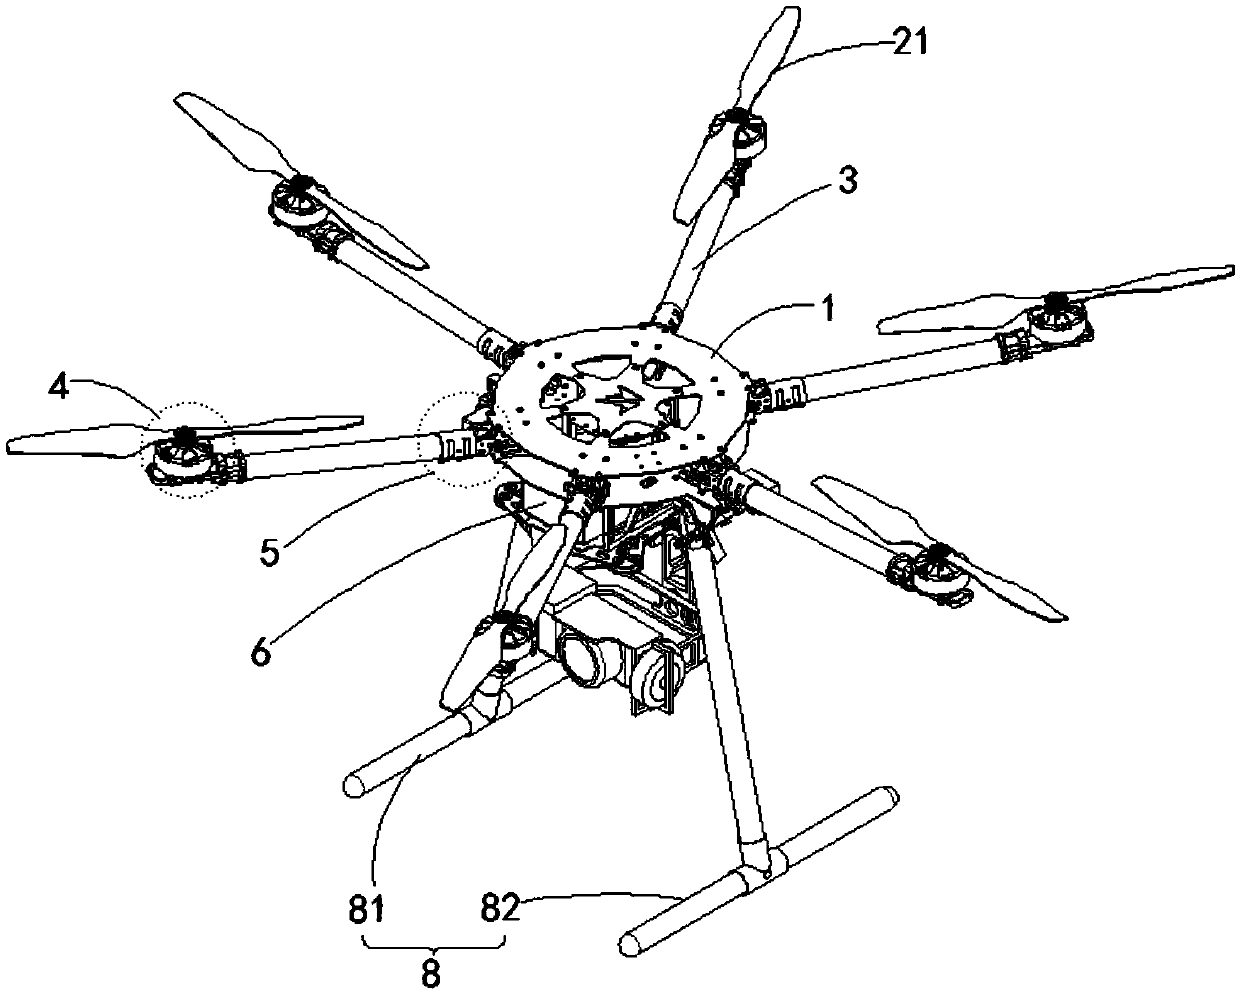 Multi-rotor structure applied in unmanned aerial vehicle